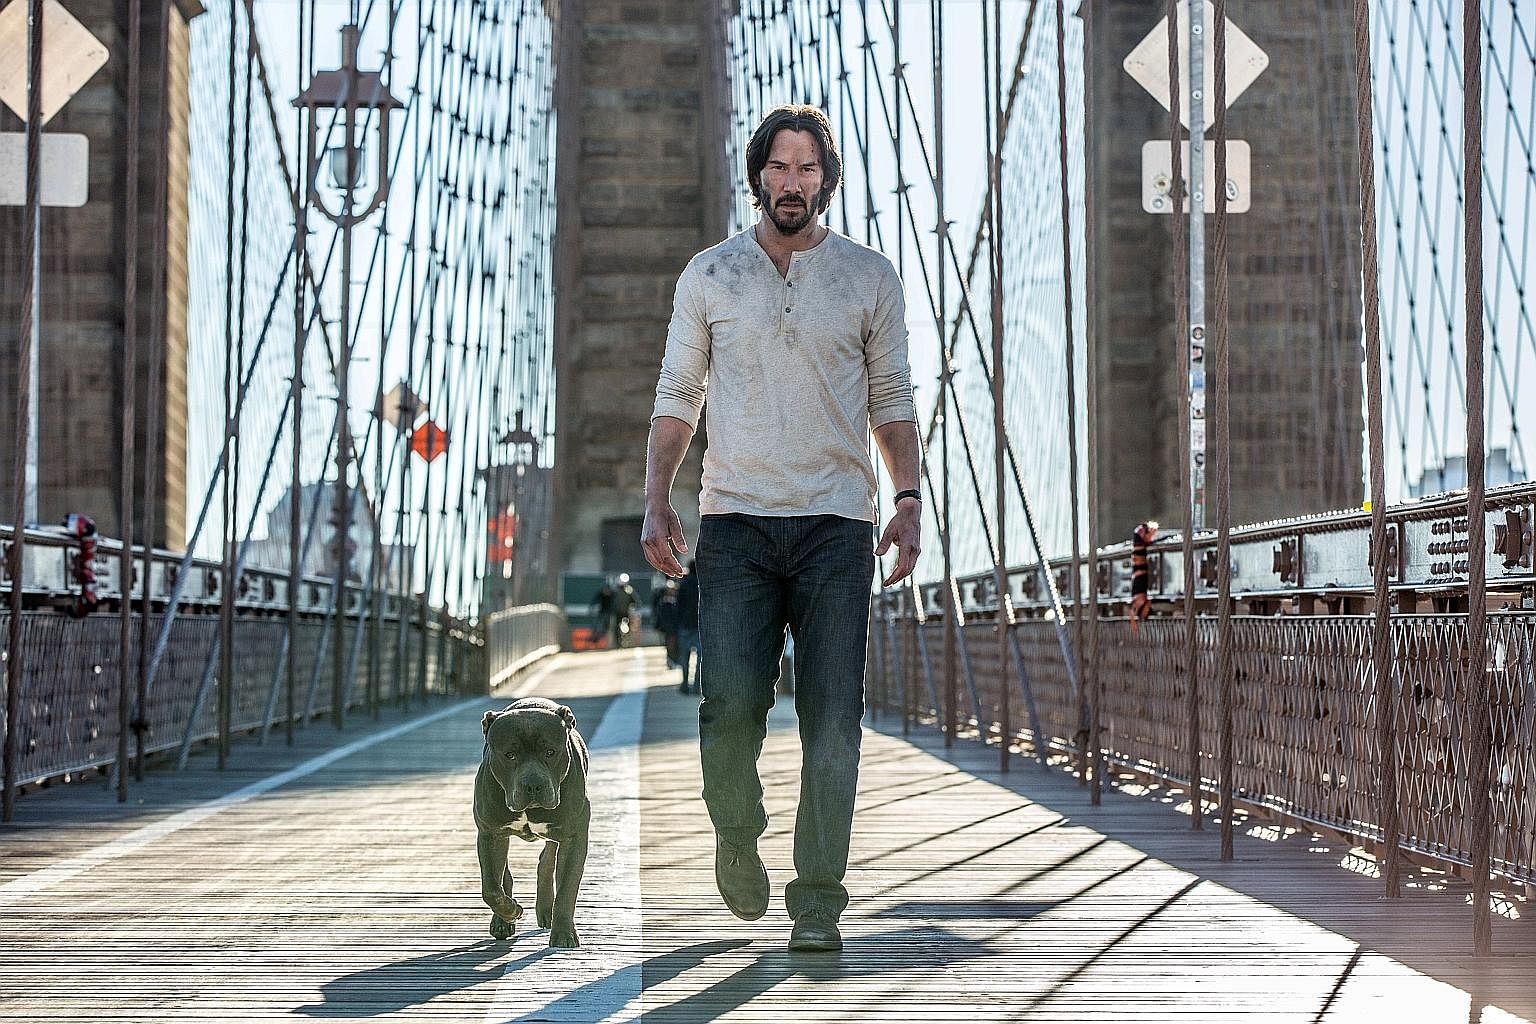 Keanu Reeves (above) returns in John Wick: Chapter 2.